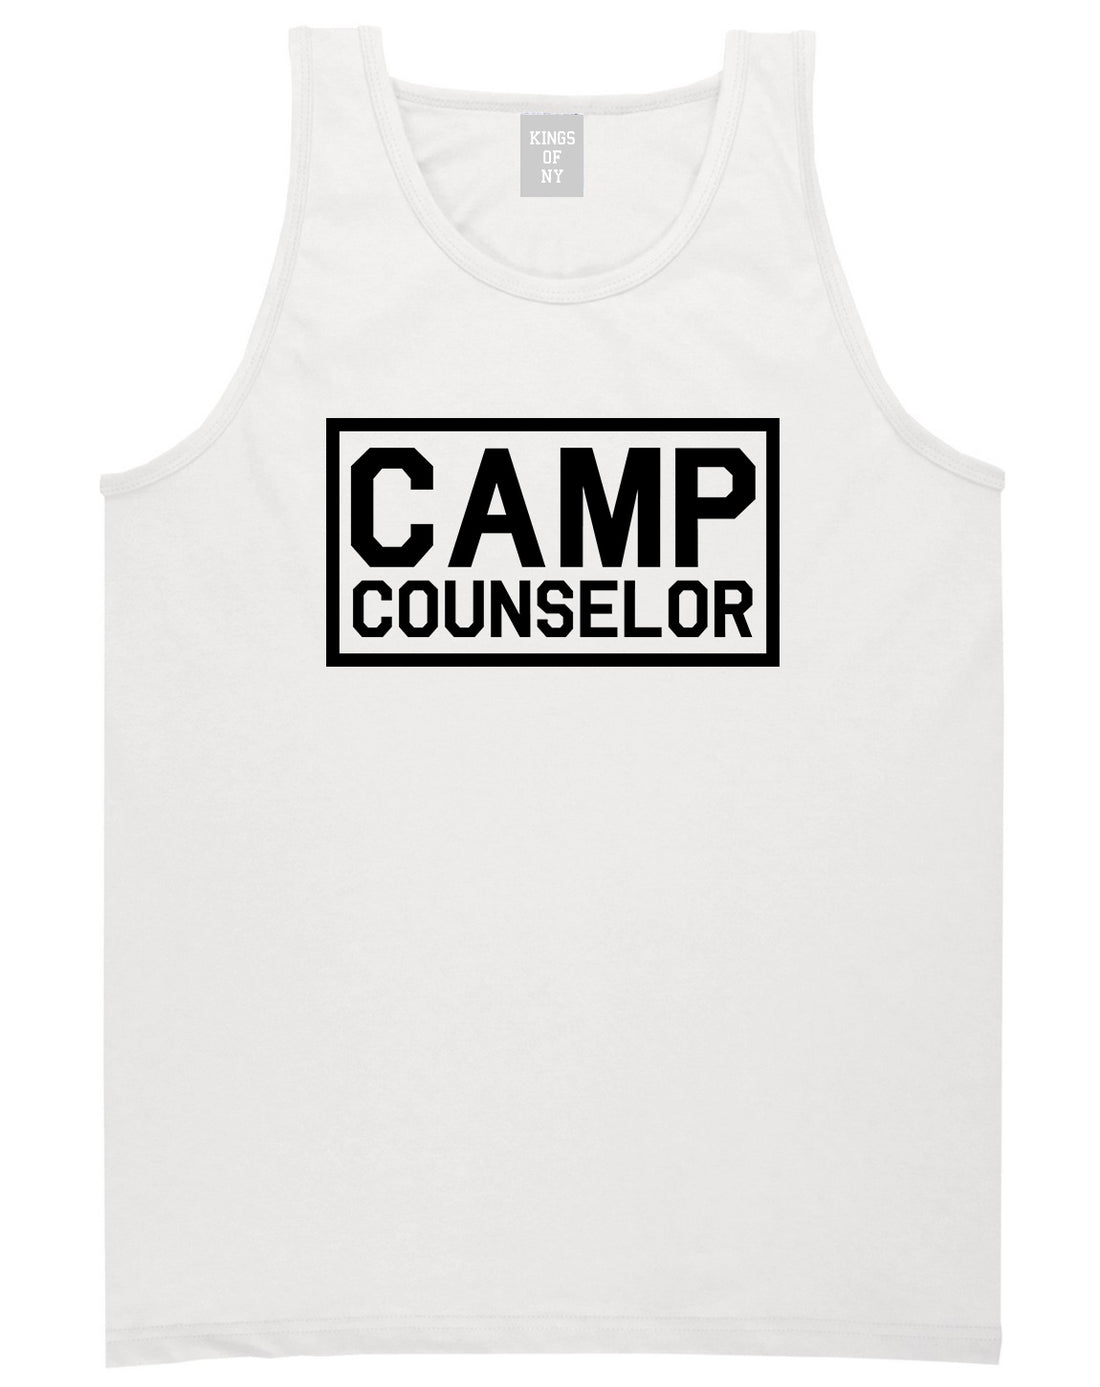 Camp Counselor White Tank Top Shirt by Kings Of NY